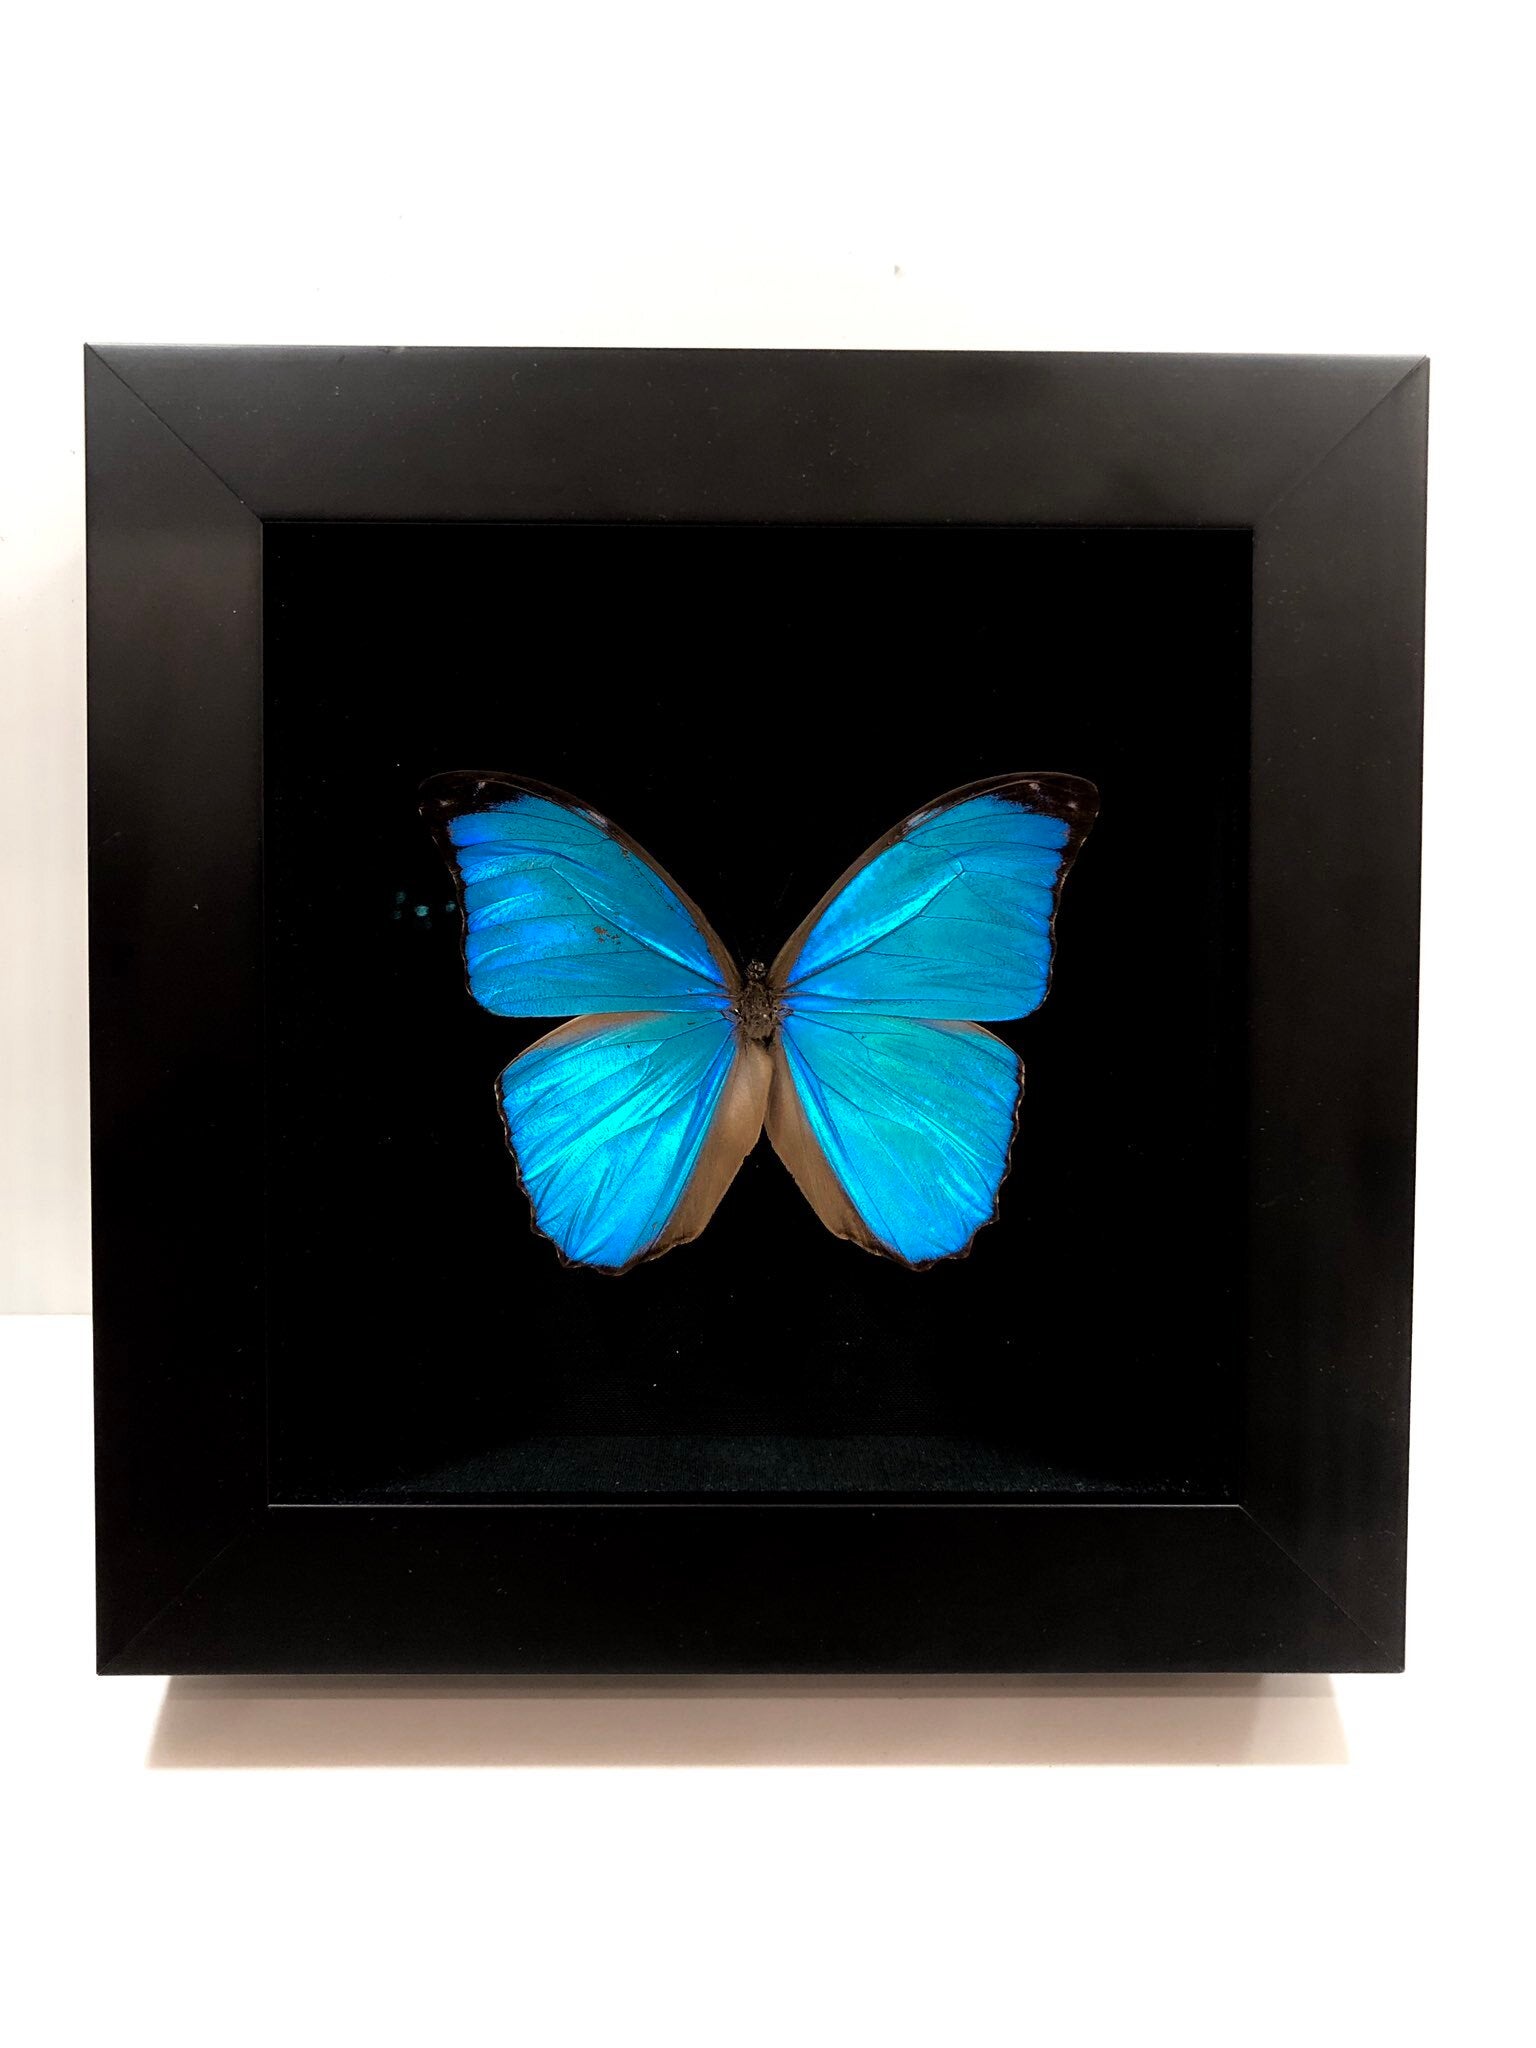 One of the already deceased butterflies used for the Motion watch face - On the fifth anniversary of the Apple Watch launch, an original team member reveals some secrets